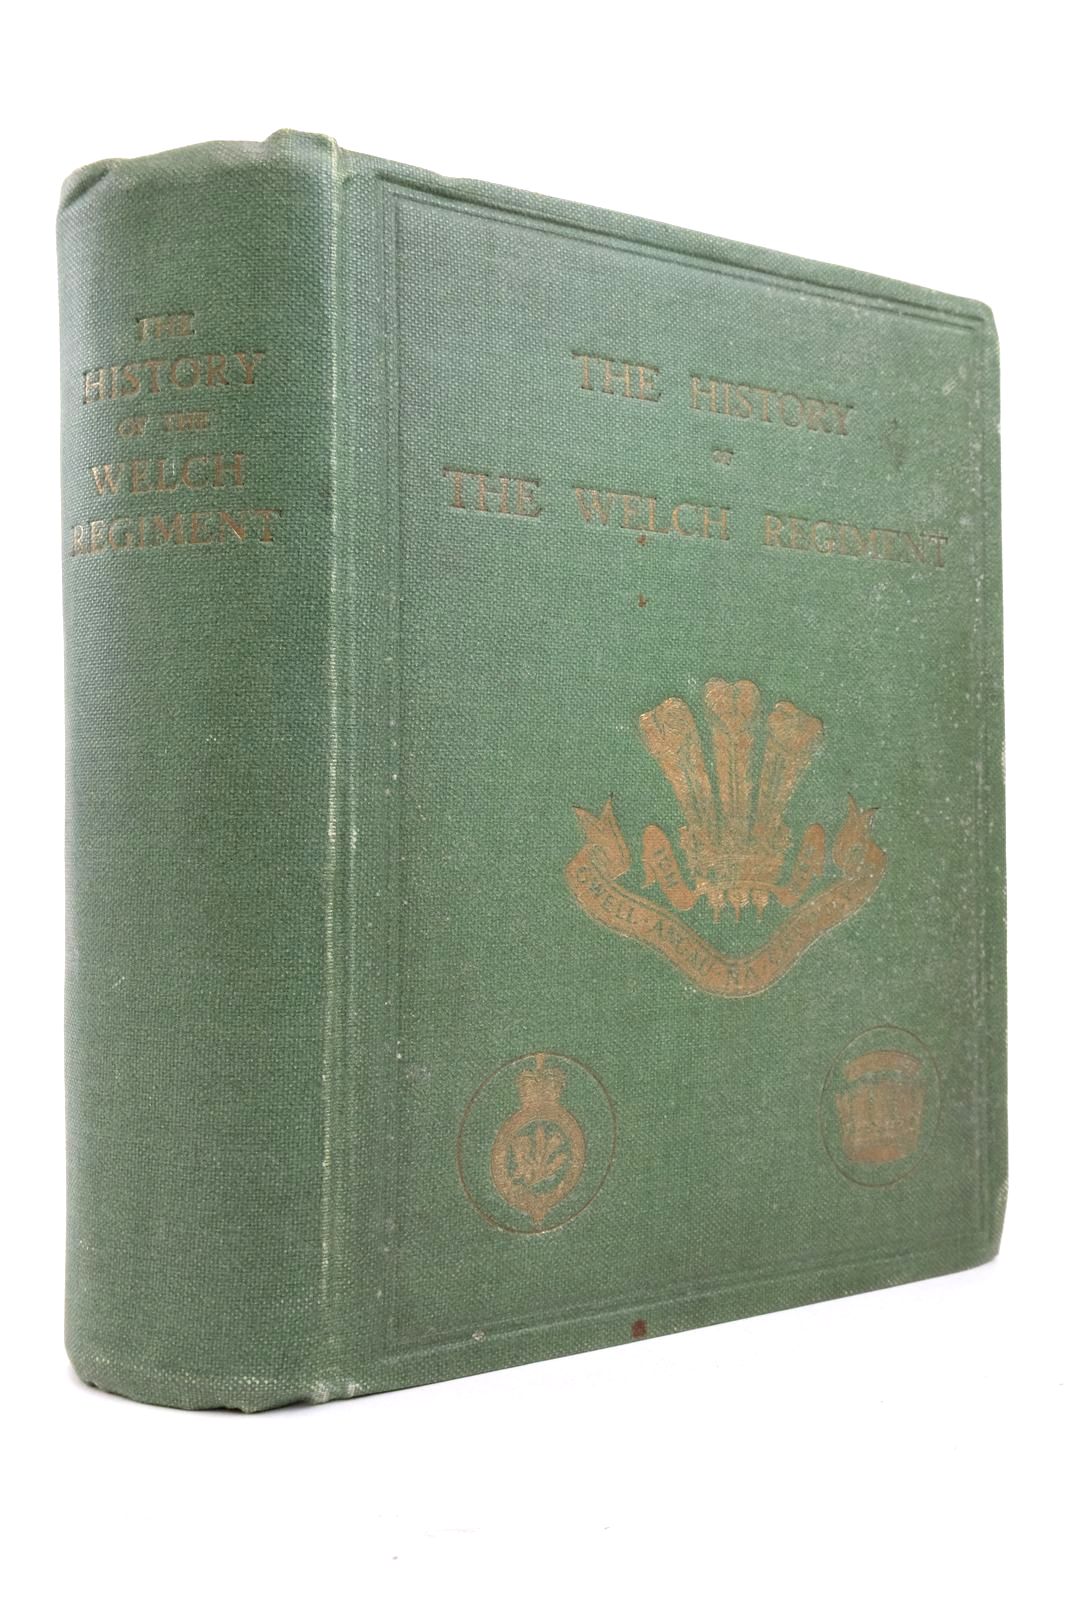 Photo of THE HISTORY OF THE WELCH REGIMENT written by Whitehorne, A.C. Marden, Thomas O. published by Western Mail And Echo Limited (STOCK CODE: 2137738)  for sale by Stella & Rose's Books